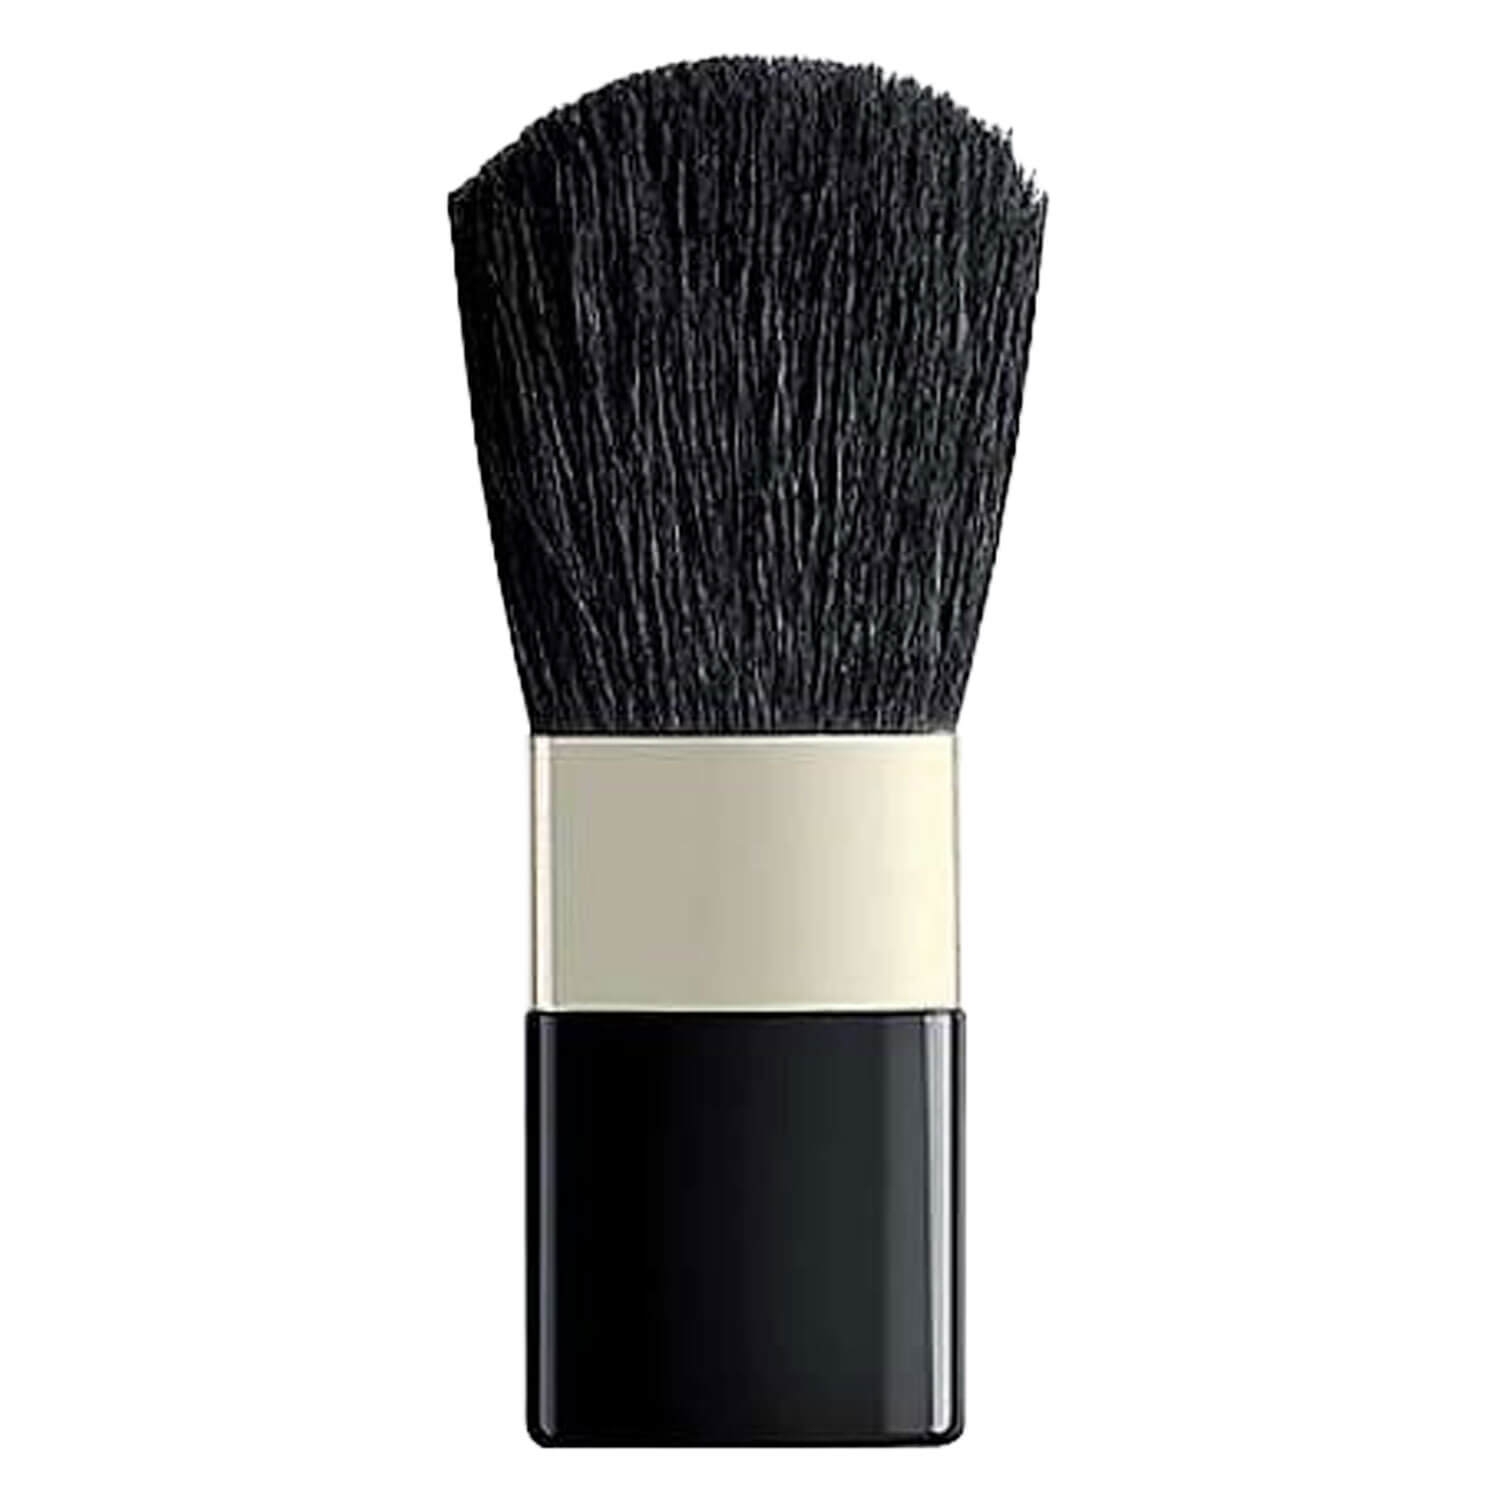 Product image from Artdeco Tools - Blusher Brush for Beauty Box